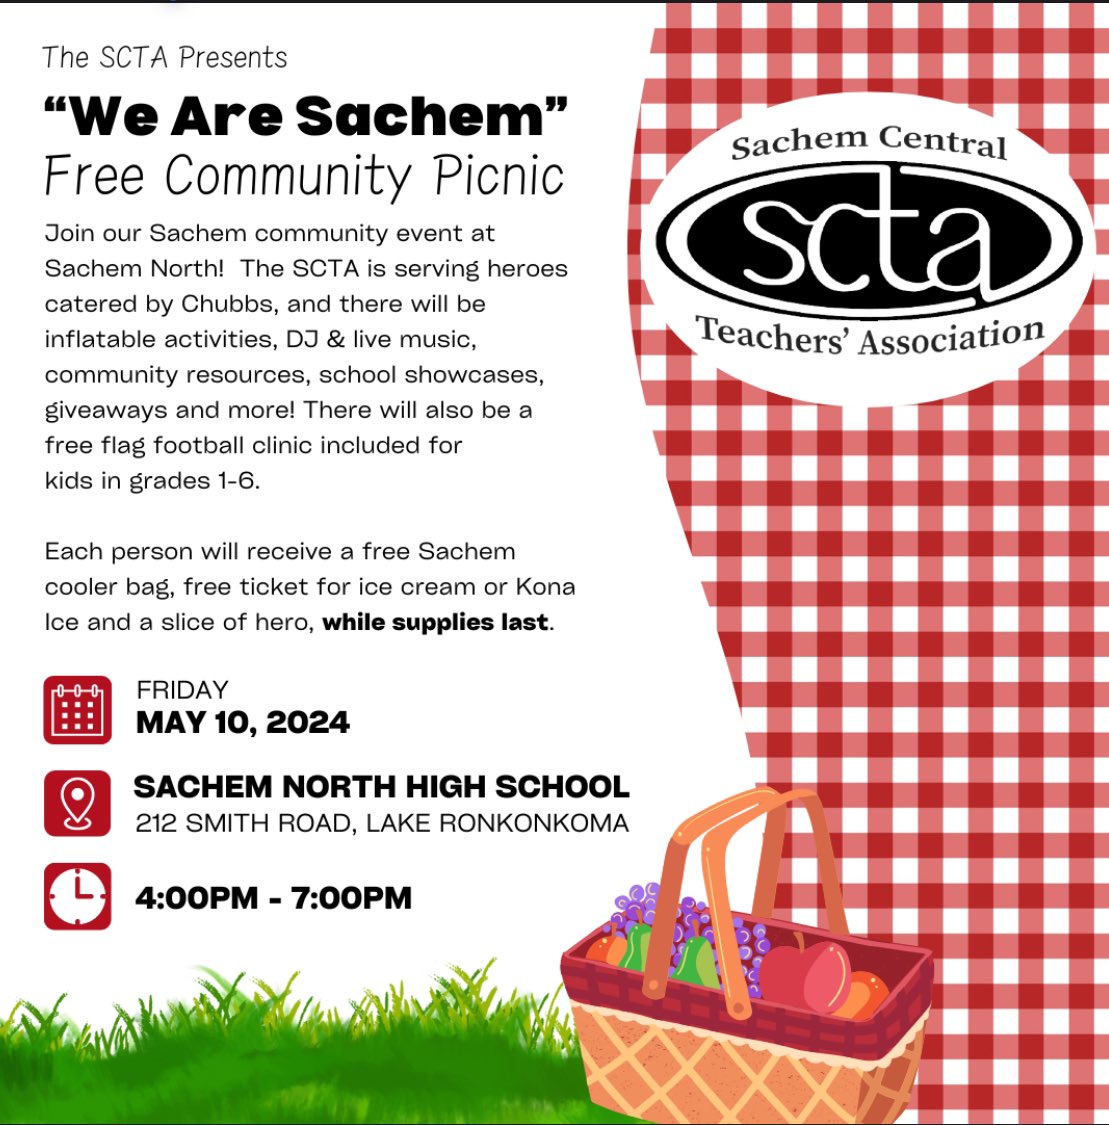 The SCTA proudly presents “We Are Sachem” 🌟FREE🌟 Community Picnic! Fun for all ages ~ May 10th at Sachem North! @nysut @wearethescta #community #picnic #sachem